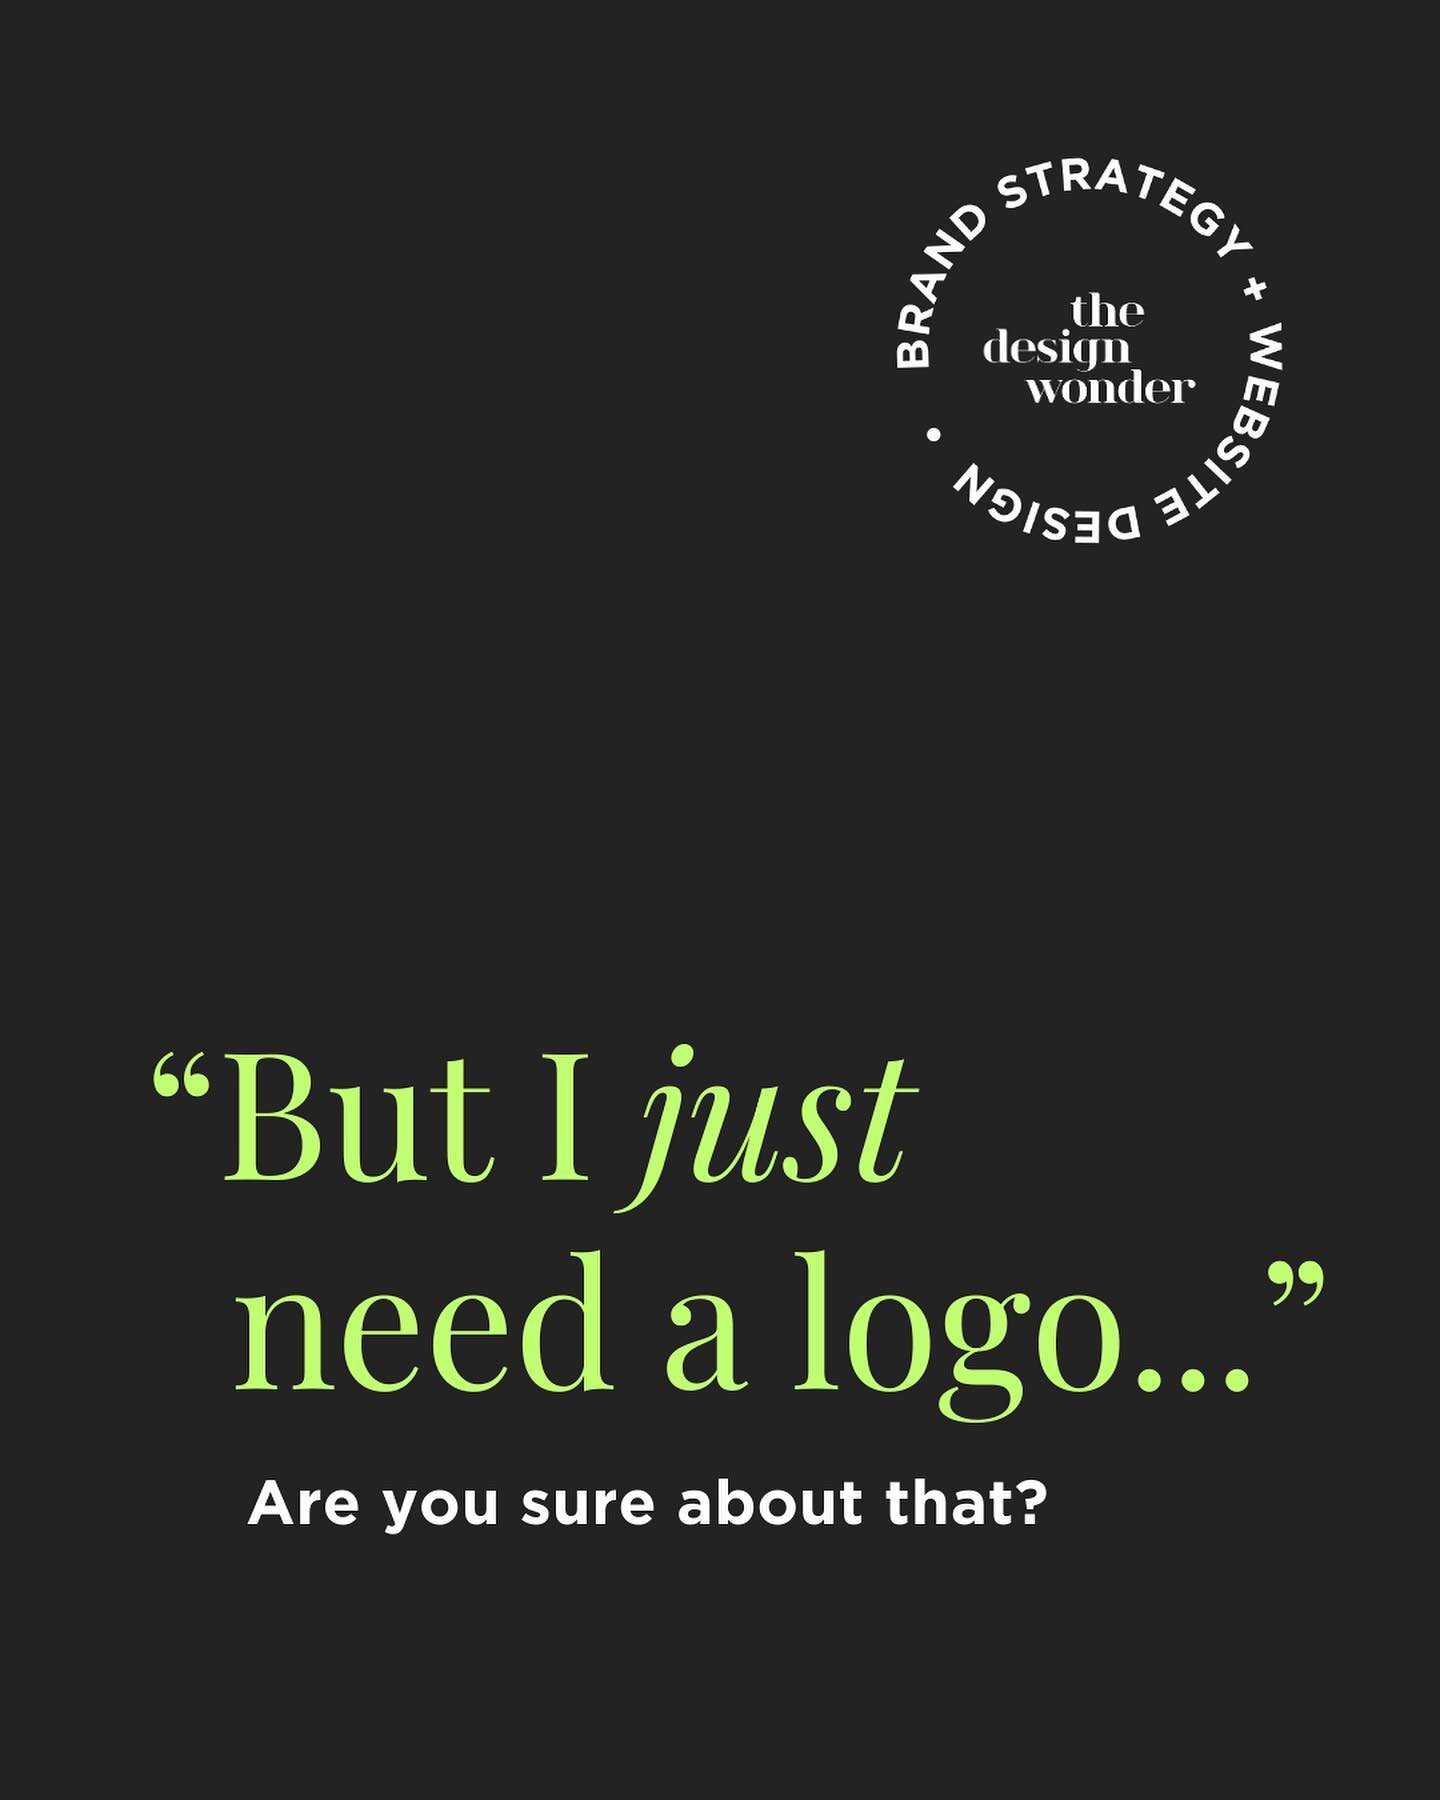 Something that designers hear all too often. By developing your brand and not &ldquo;just&rdquo; a logo, you are creating the foundation for all your other business materials. The investment is well worth it.

Developing your brand means you are craf